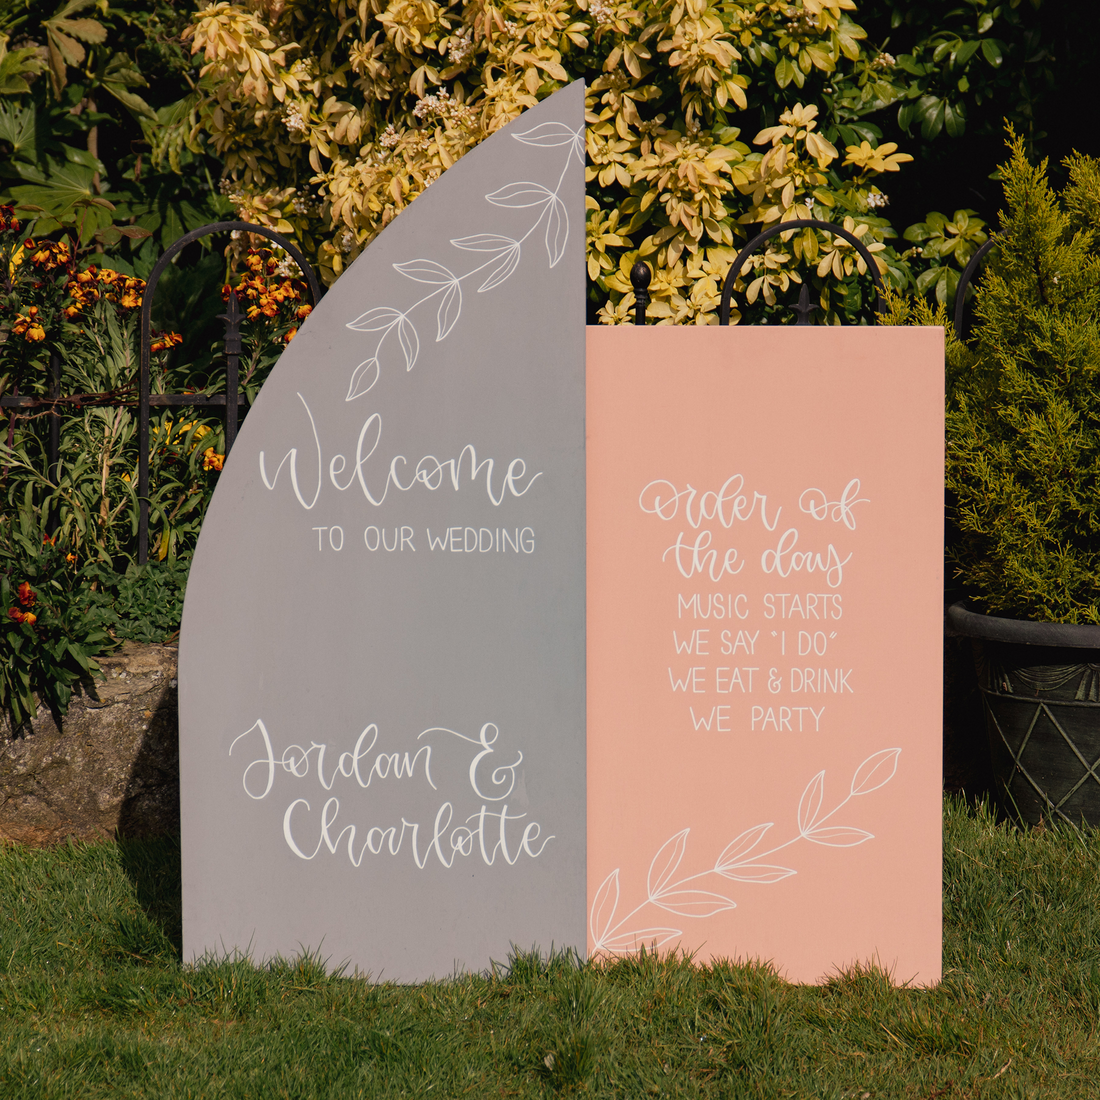 Wedding Signage: What should I have on my day?